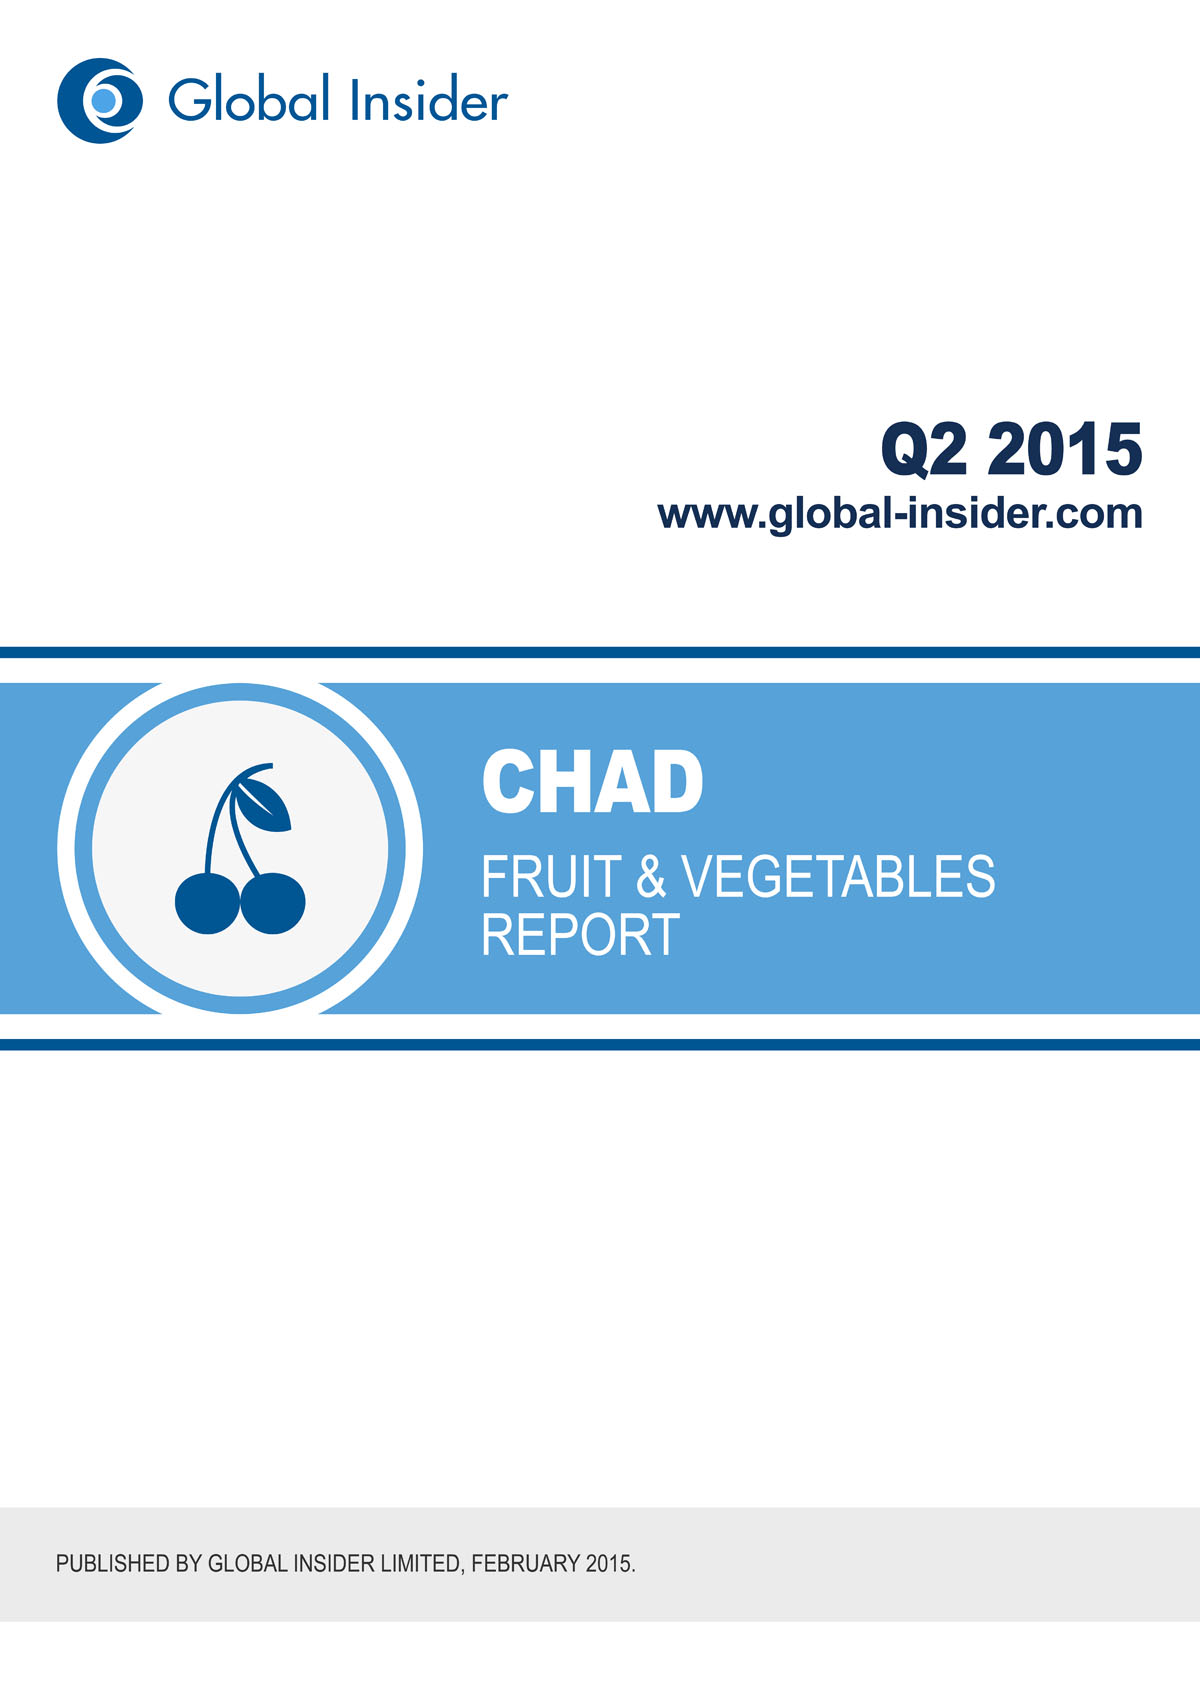 Chad Fruit & Vegetables Report